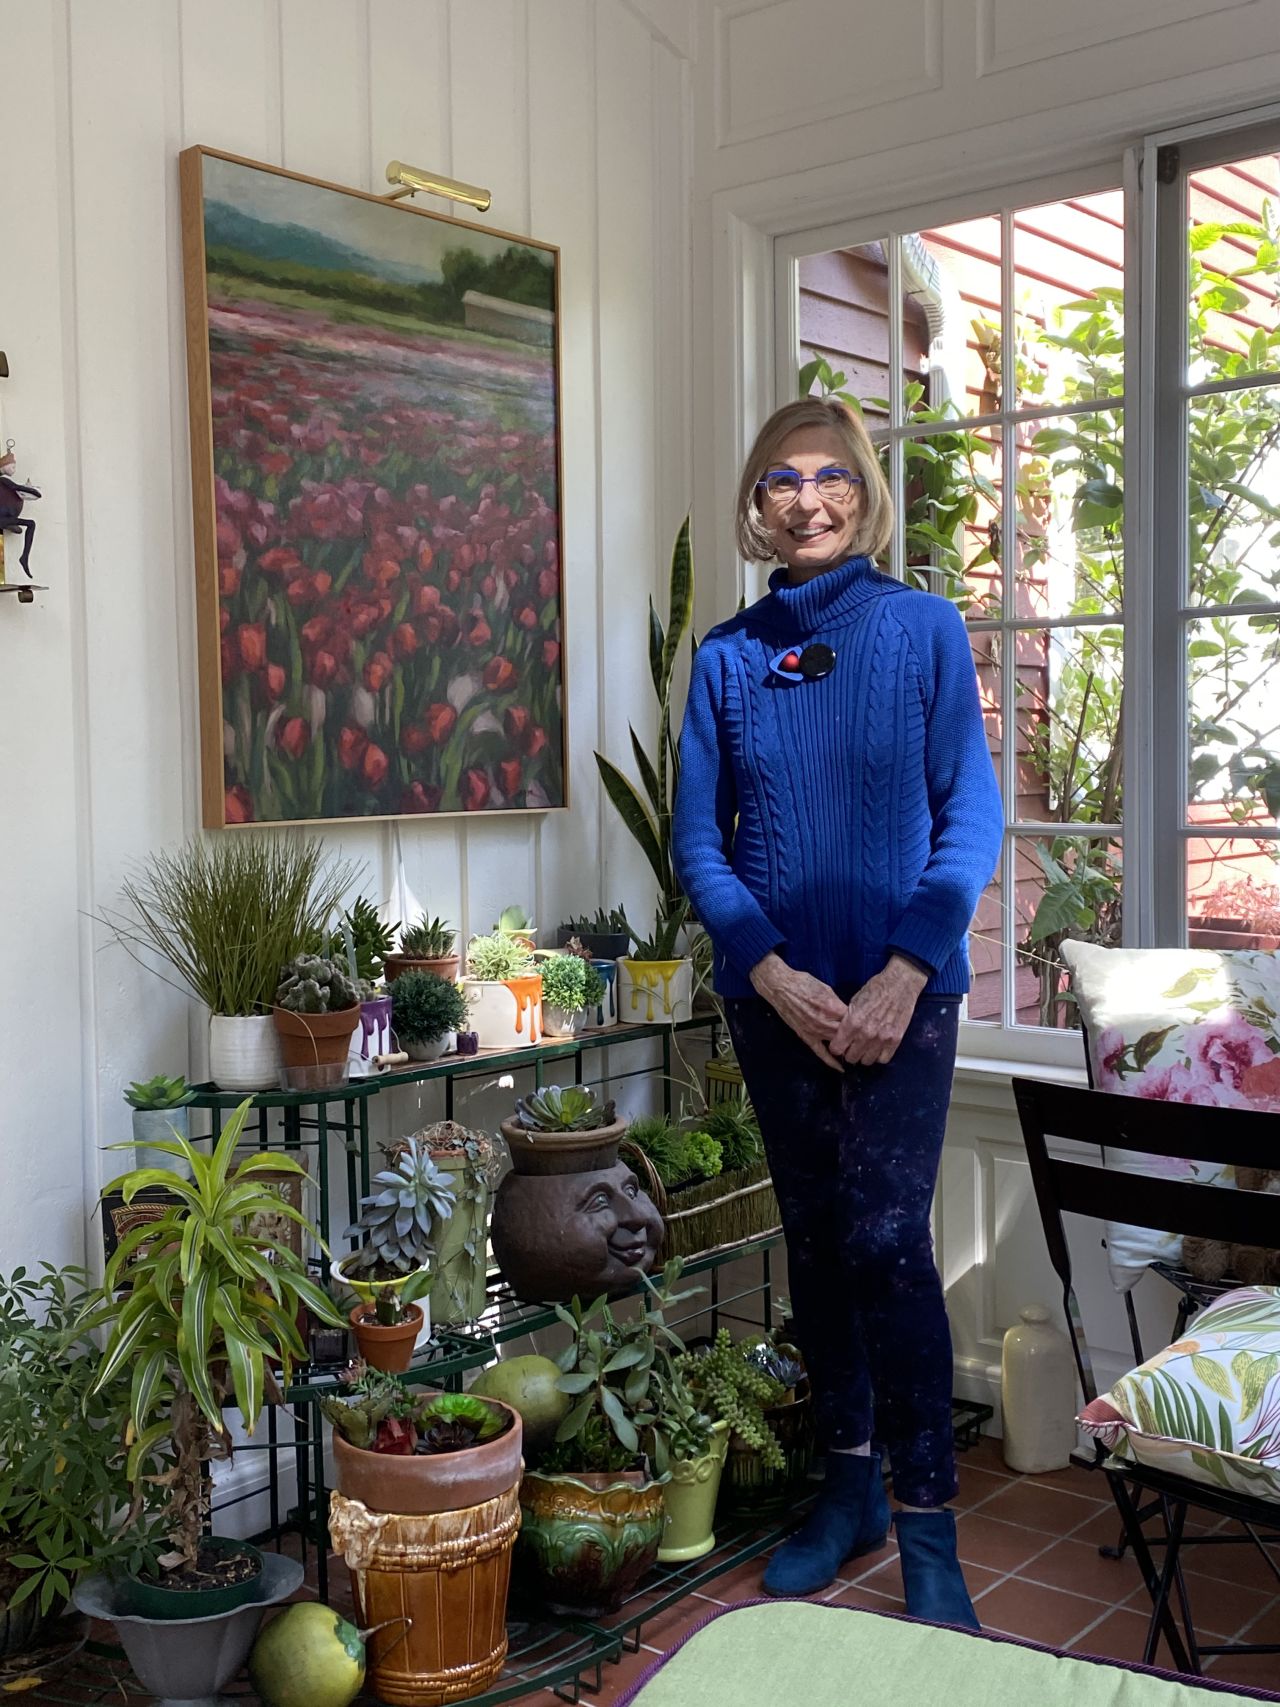 "My sun room is my sanctuary," Eiseman said. "The important colors in the room are green and violet, with a few other floral colors in the mix."